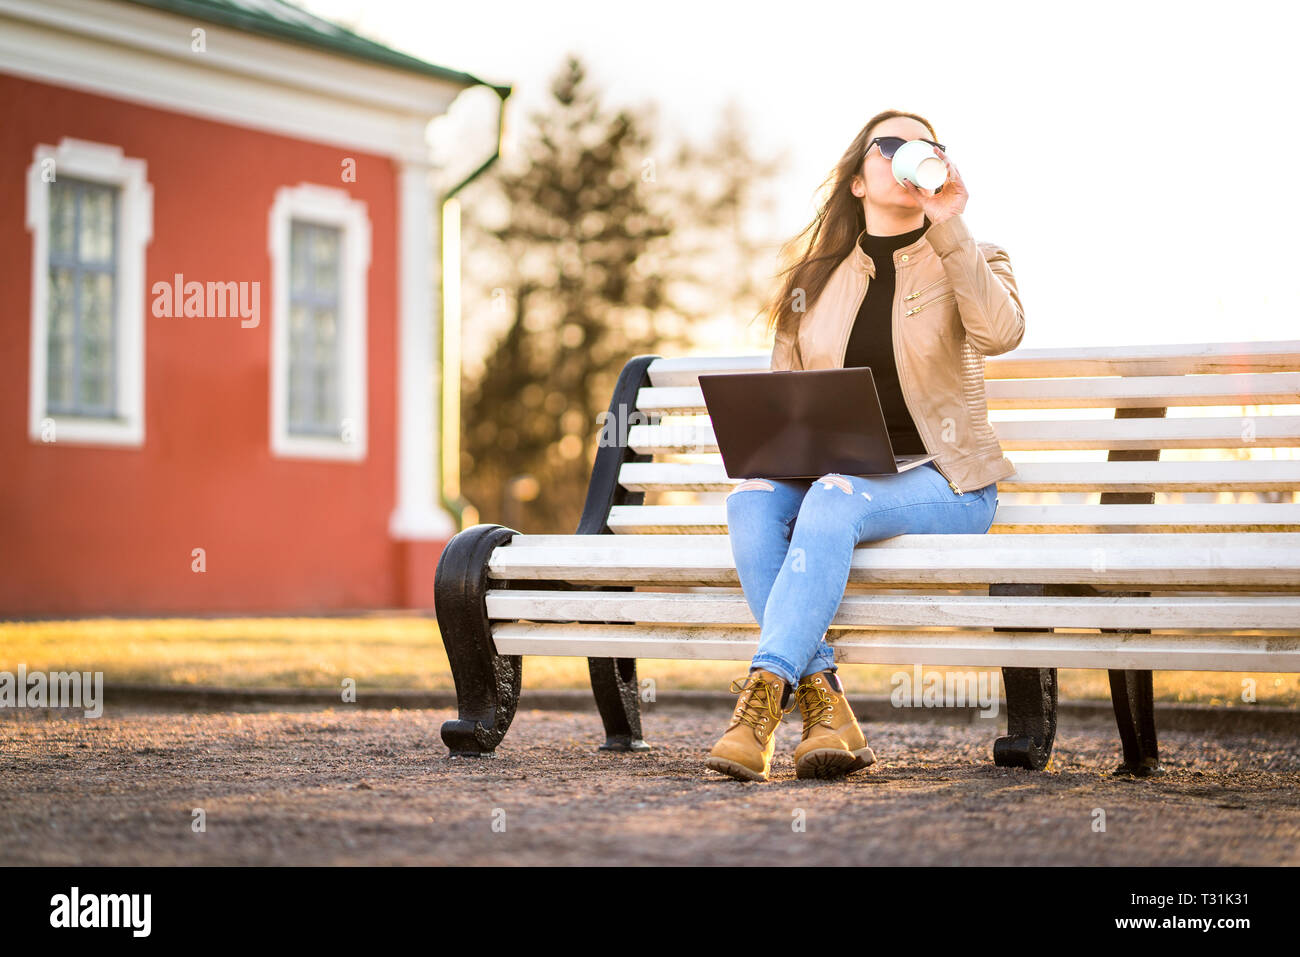 Remote work in outdoor office. Business woman working with laptop in the park or student studying outdoors in campus. Lady drinking coffee. Stock Photo